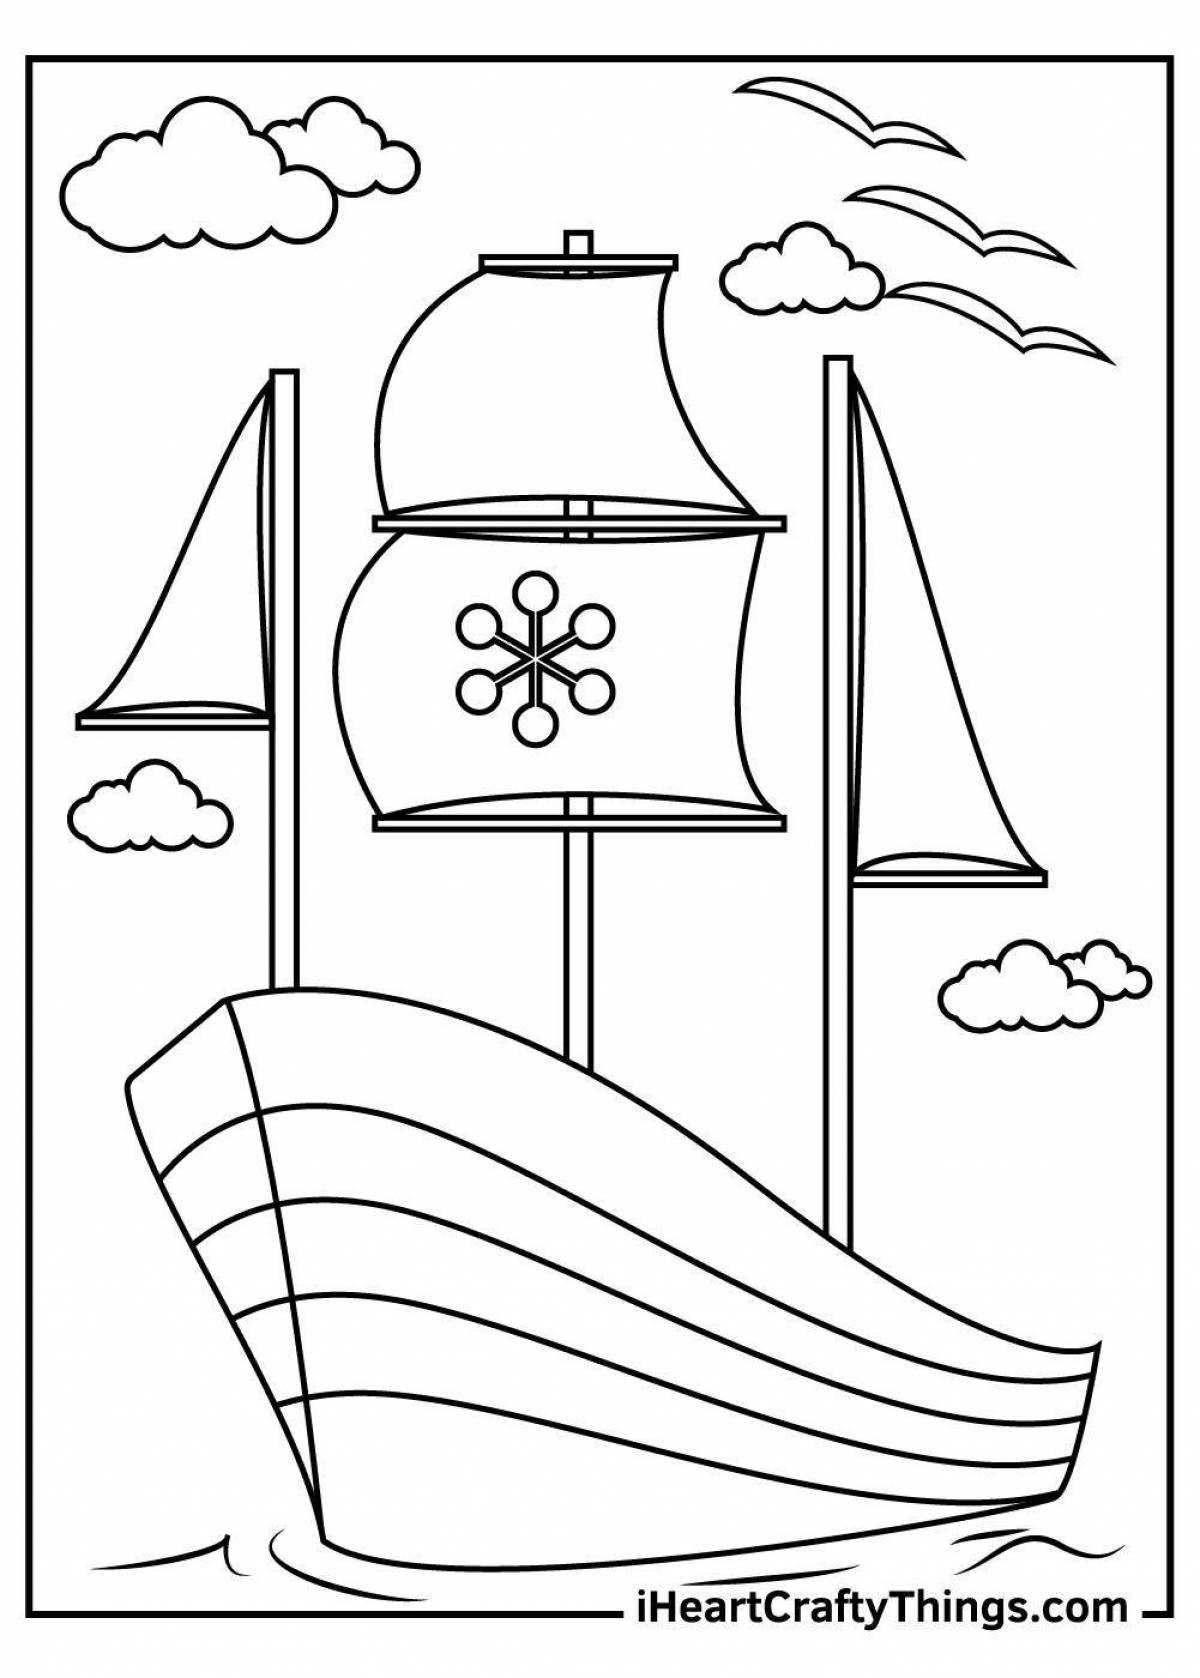 Coloring book funny boat for children 5-6 years old